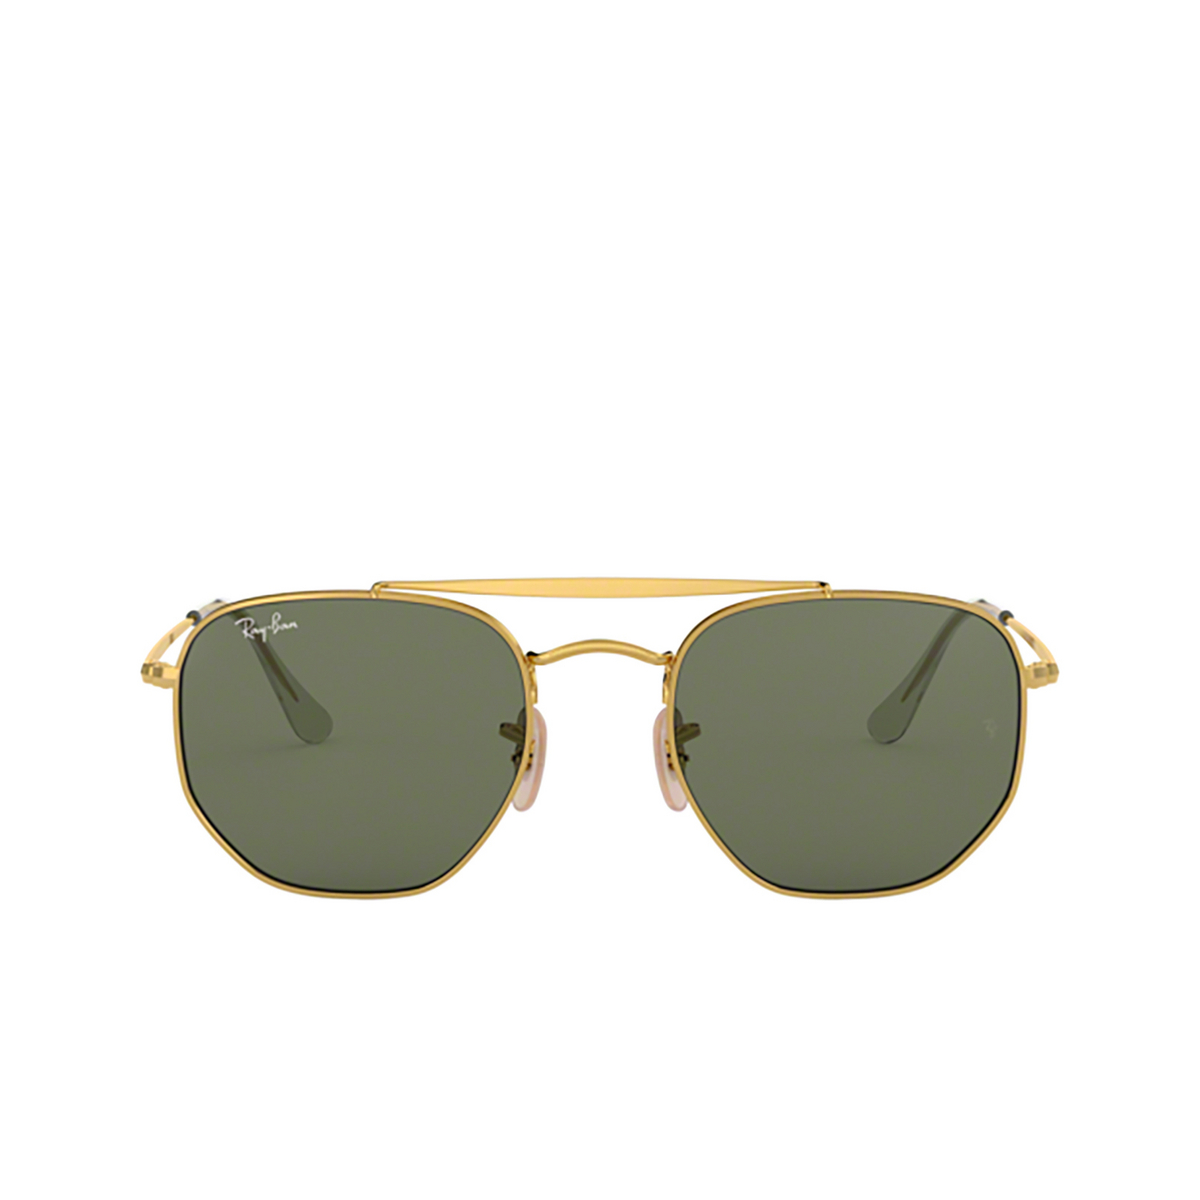 Ray-Ban THE MARSHAL Sunglasses 001 ARISTA - front view